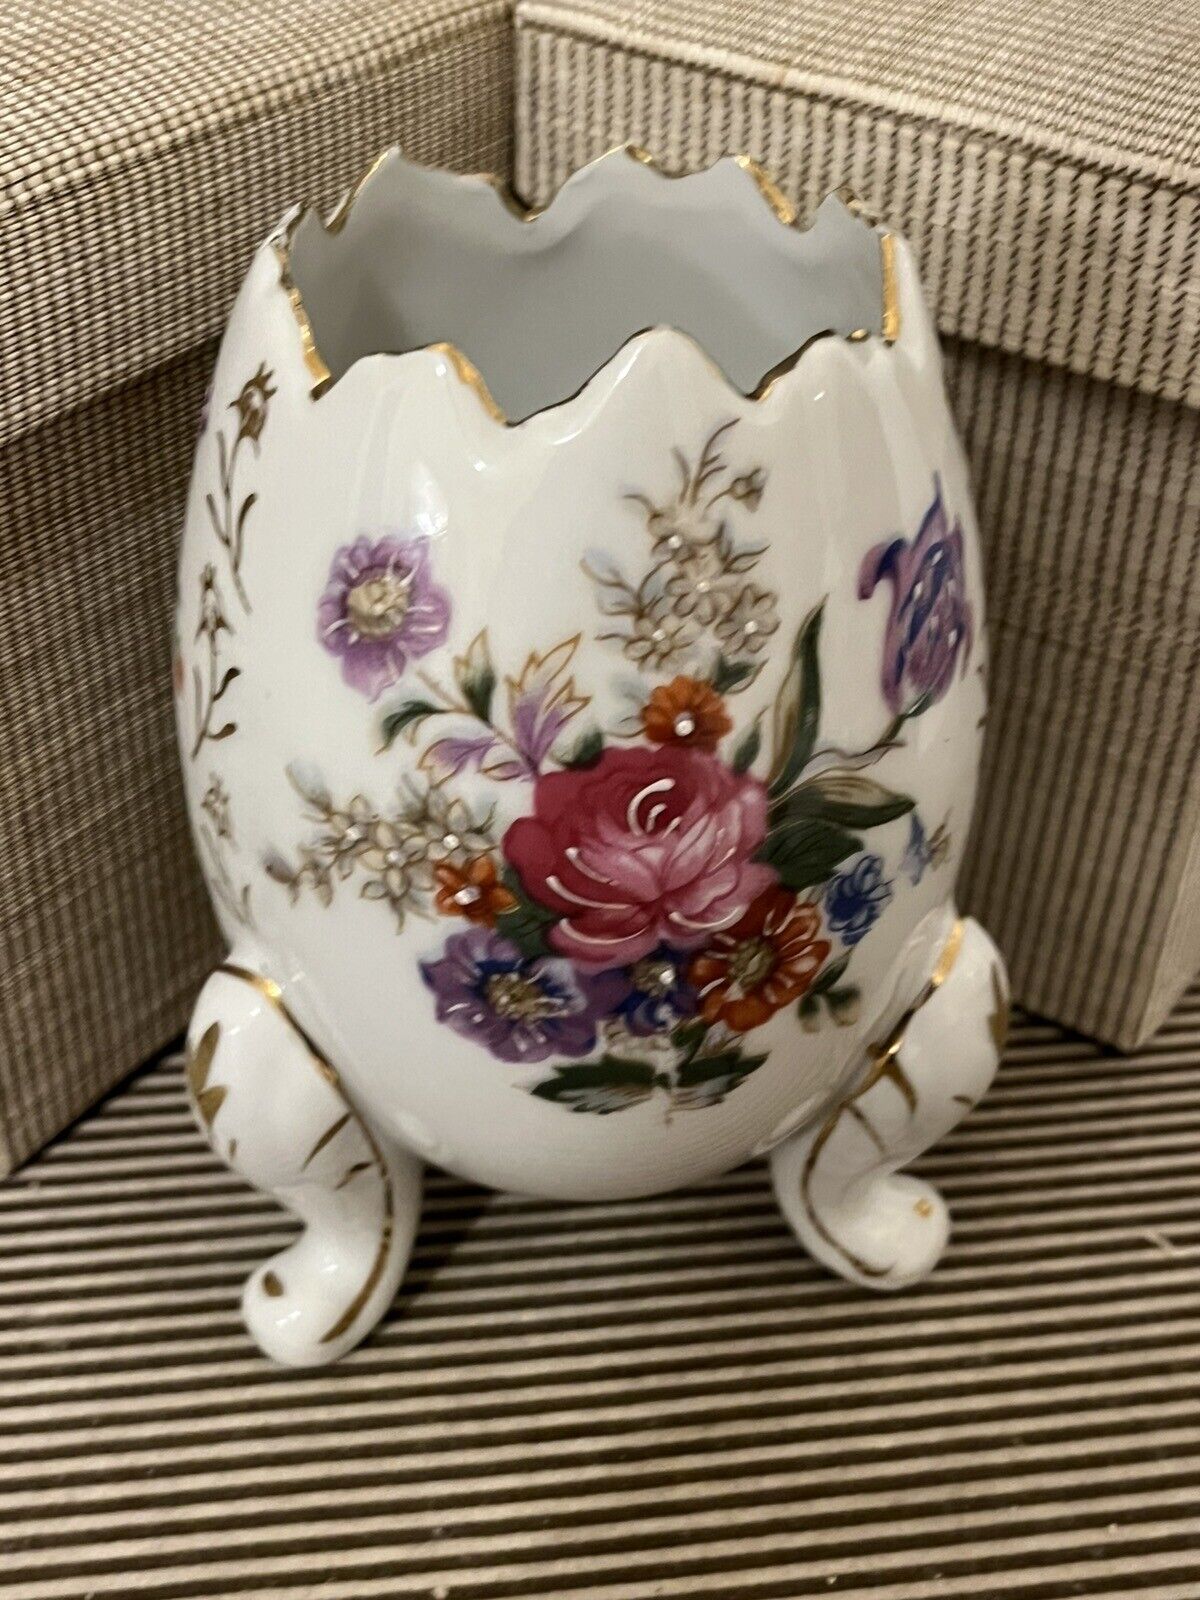 Footed Napco Ceramic  Cracked Egg Vase Hand Painted Flowers: Lovely